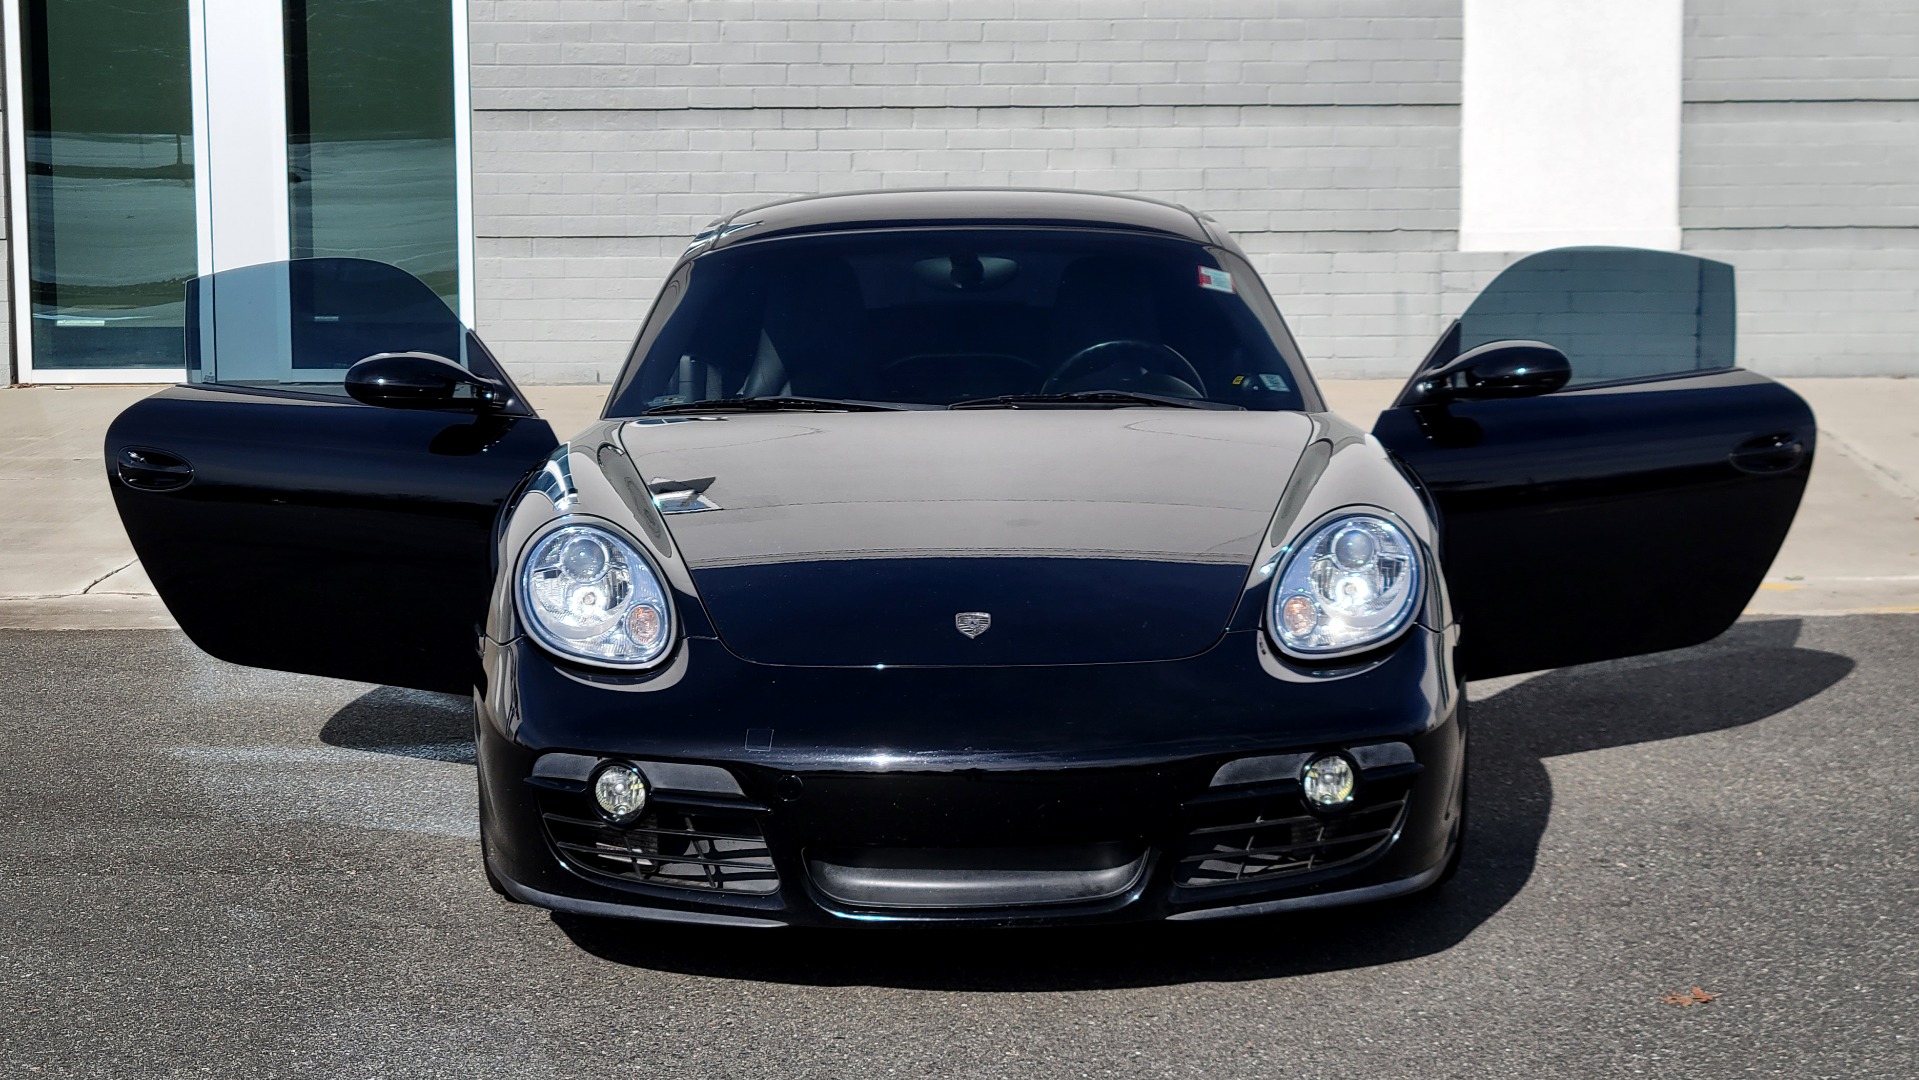 Used 2007 Porsche CAYMAN COUPE 2.7L / 5-SPD MANUAL / HTD STS / AIR COND / JL AUDIO / BORLA EXH for sale $25,999 at Formula Imports in Charlotte NC 28227 29